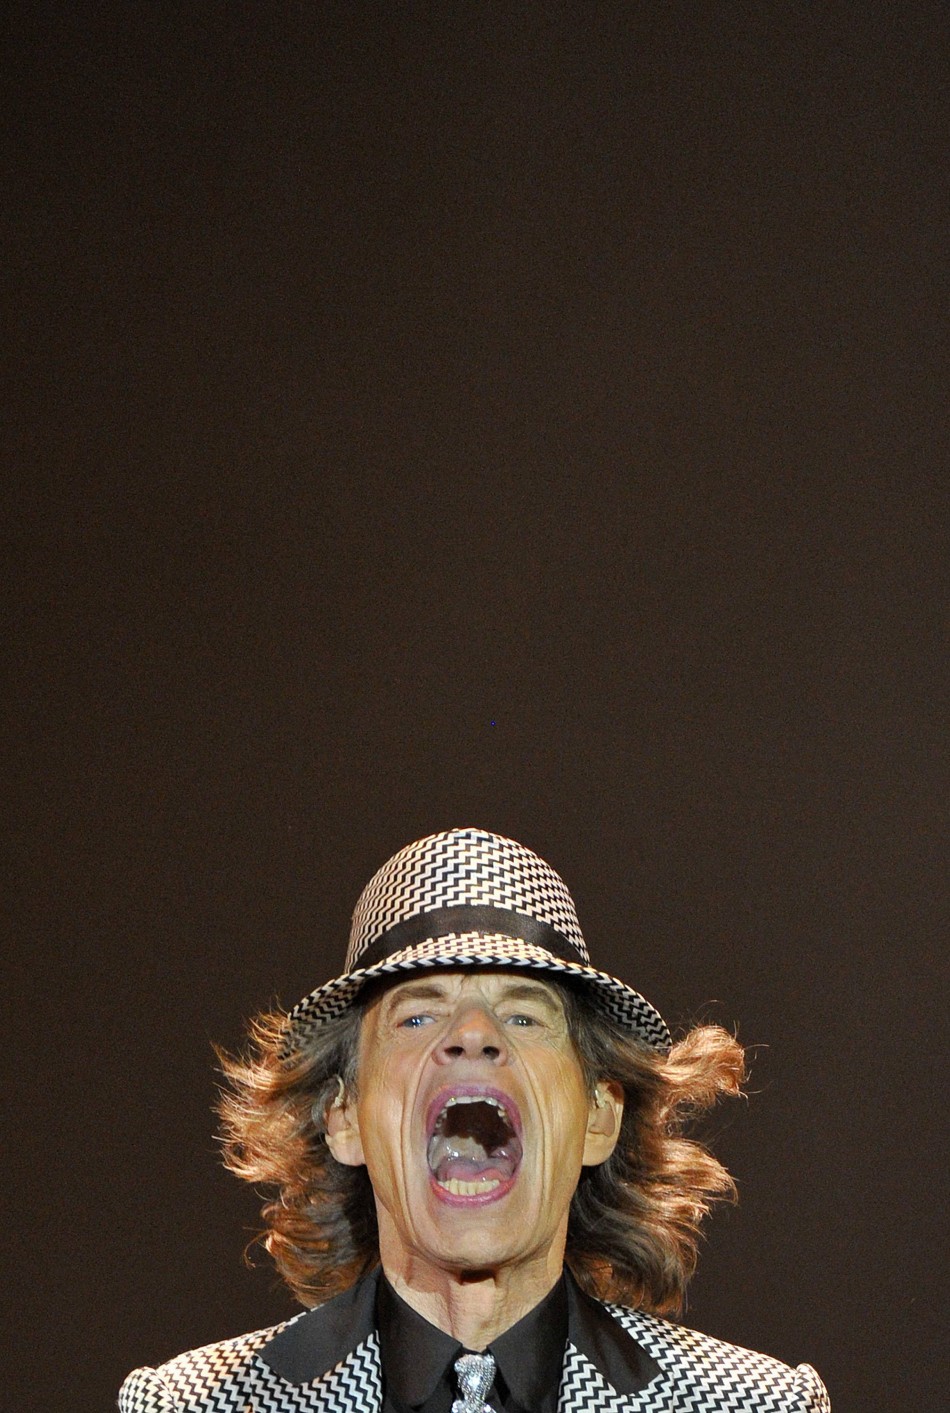 The Rolling Stones perform at the O2 Arena in London